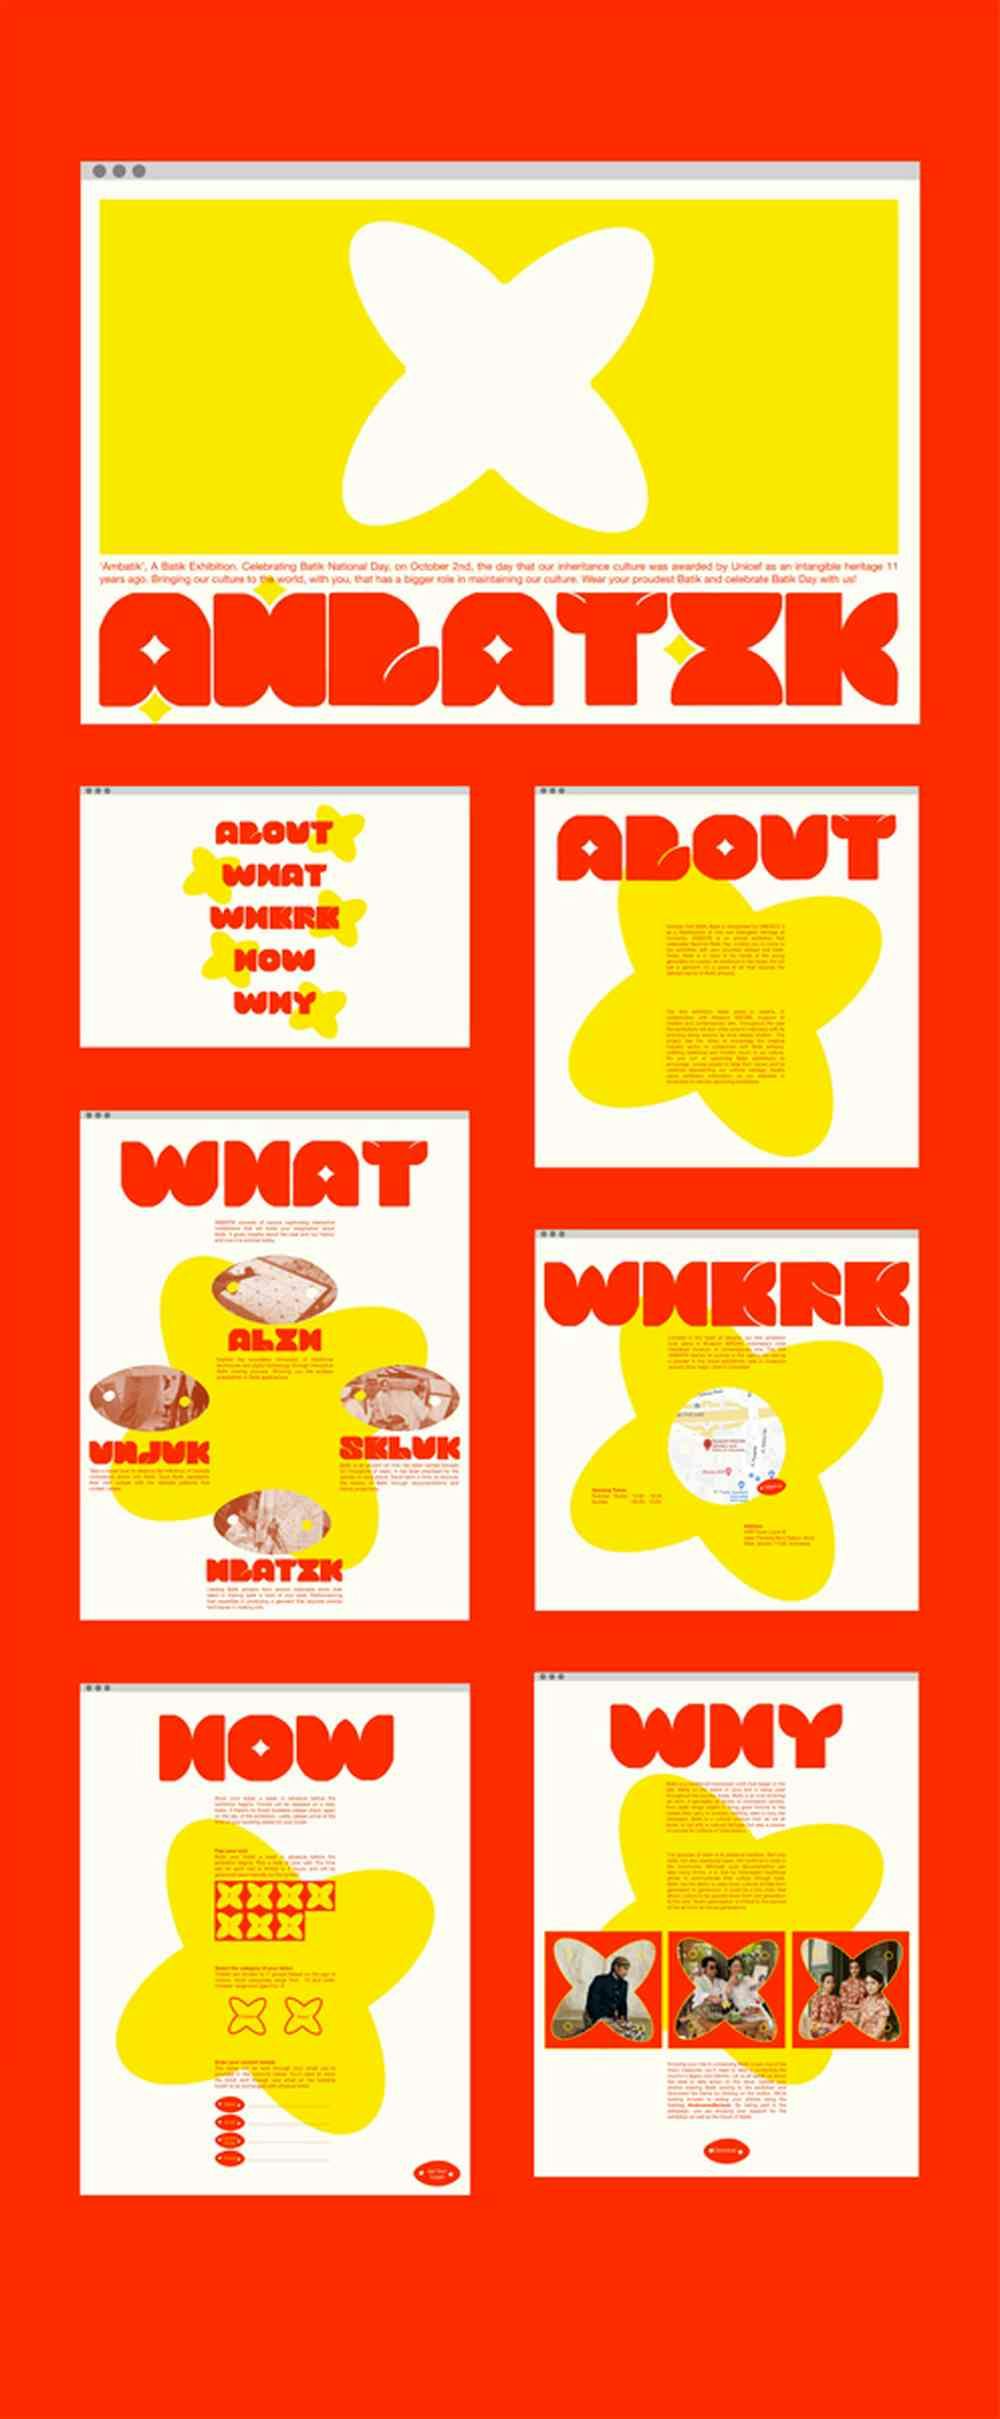 A series of web page designs in a red, white and yellow colouring. The first web page features the “Anbatik” logo the rest have the titles “About”, “What”, “Where”, “Now” and “Why”.